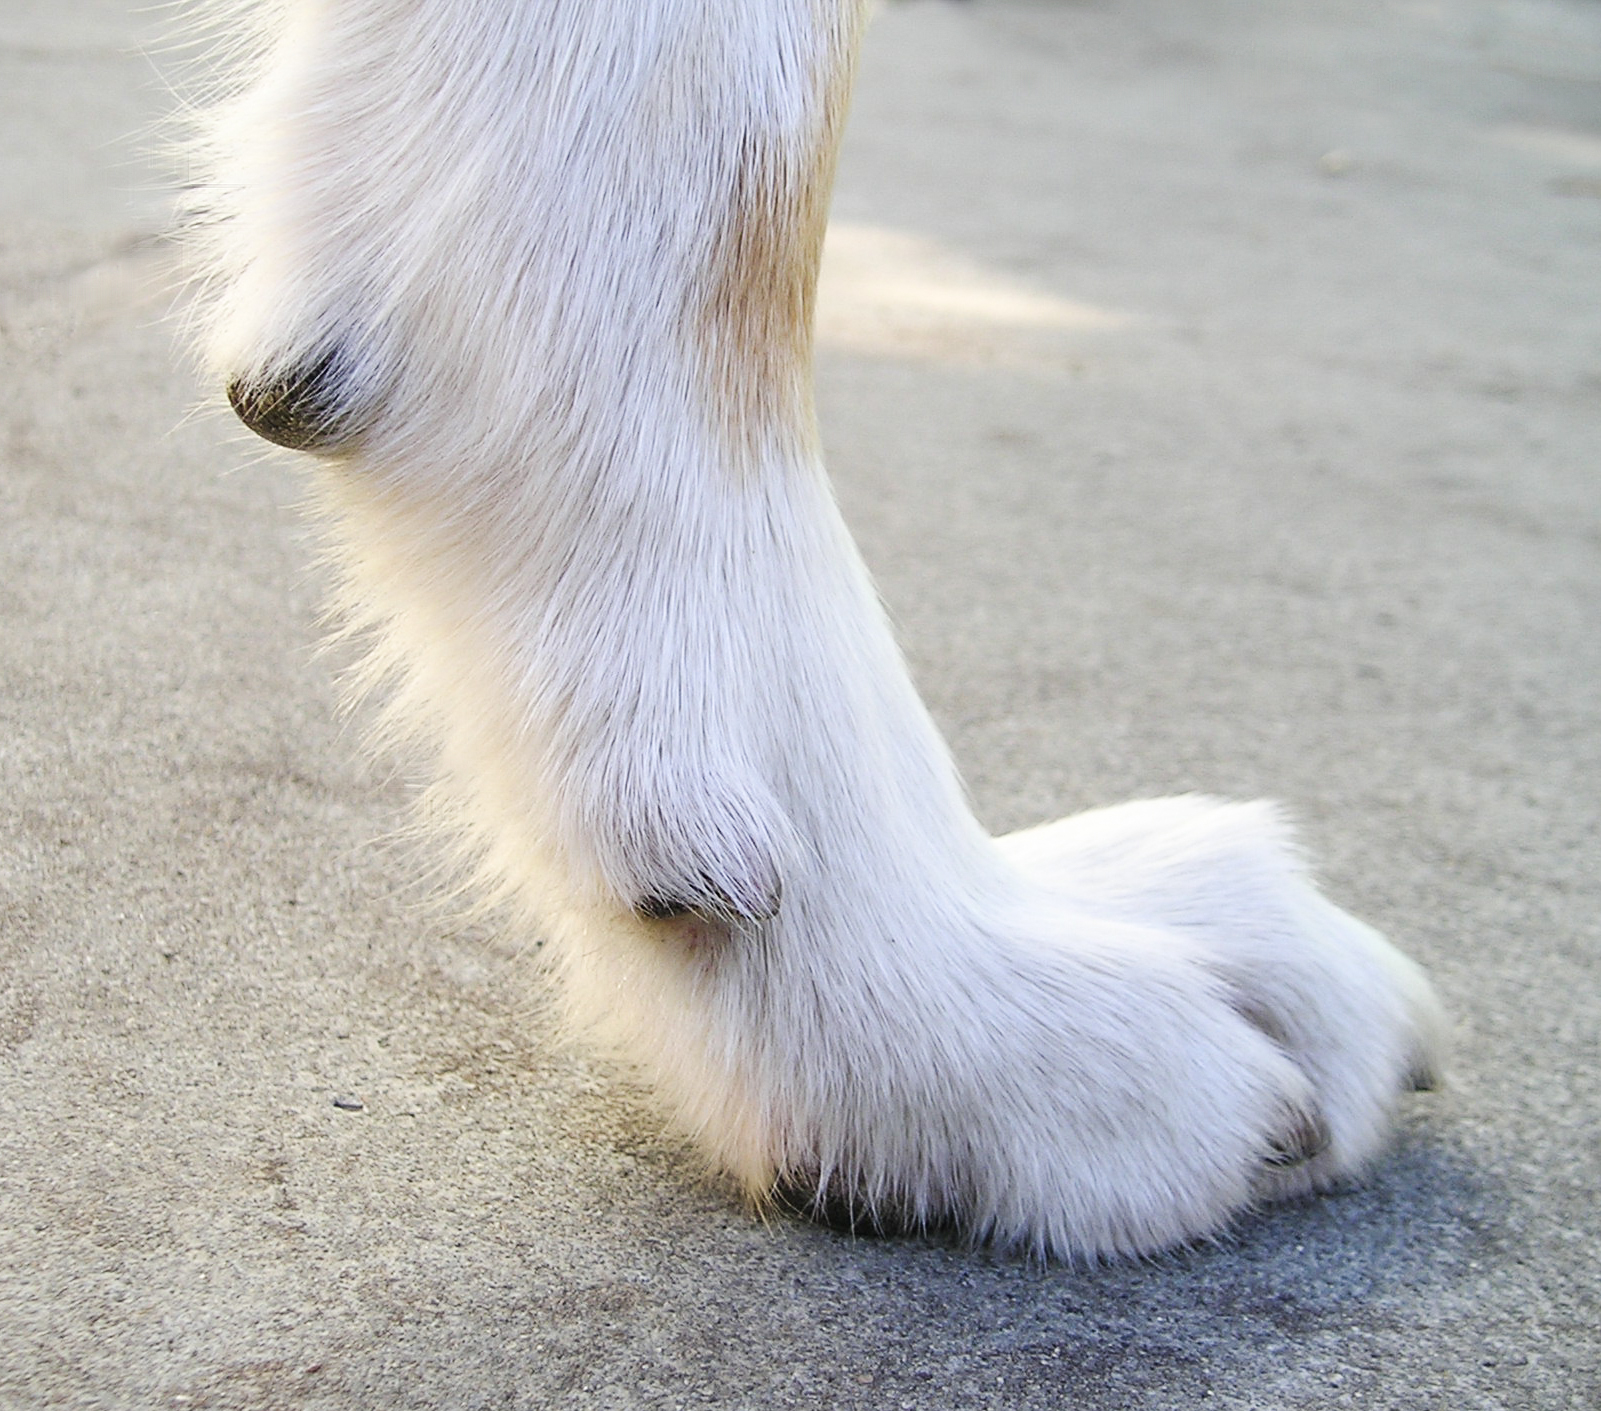 Removing Dew Claws: A Step-by-Step Overview